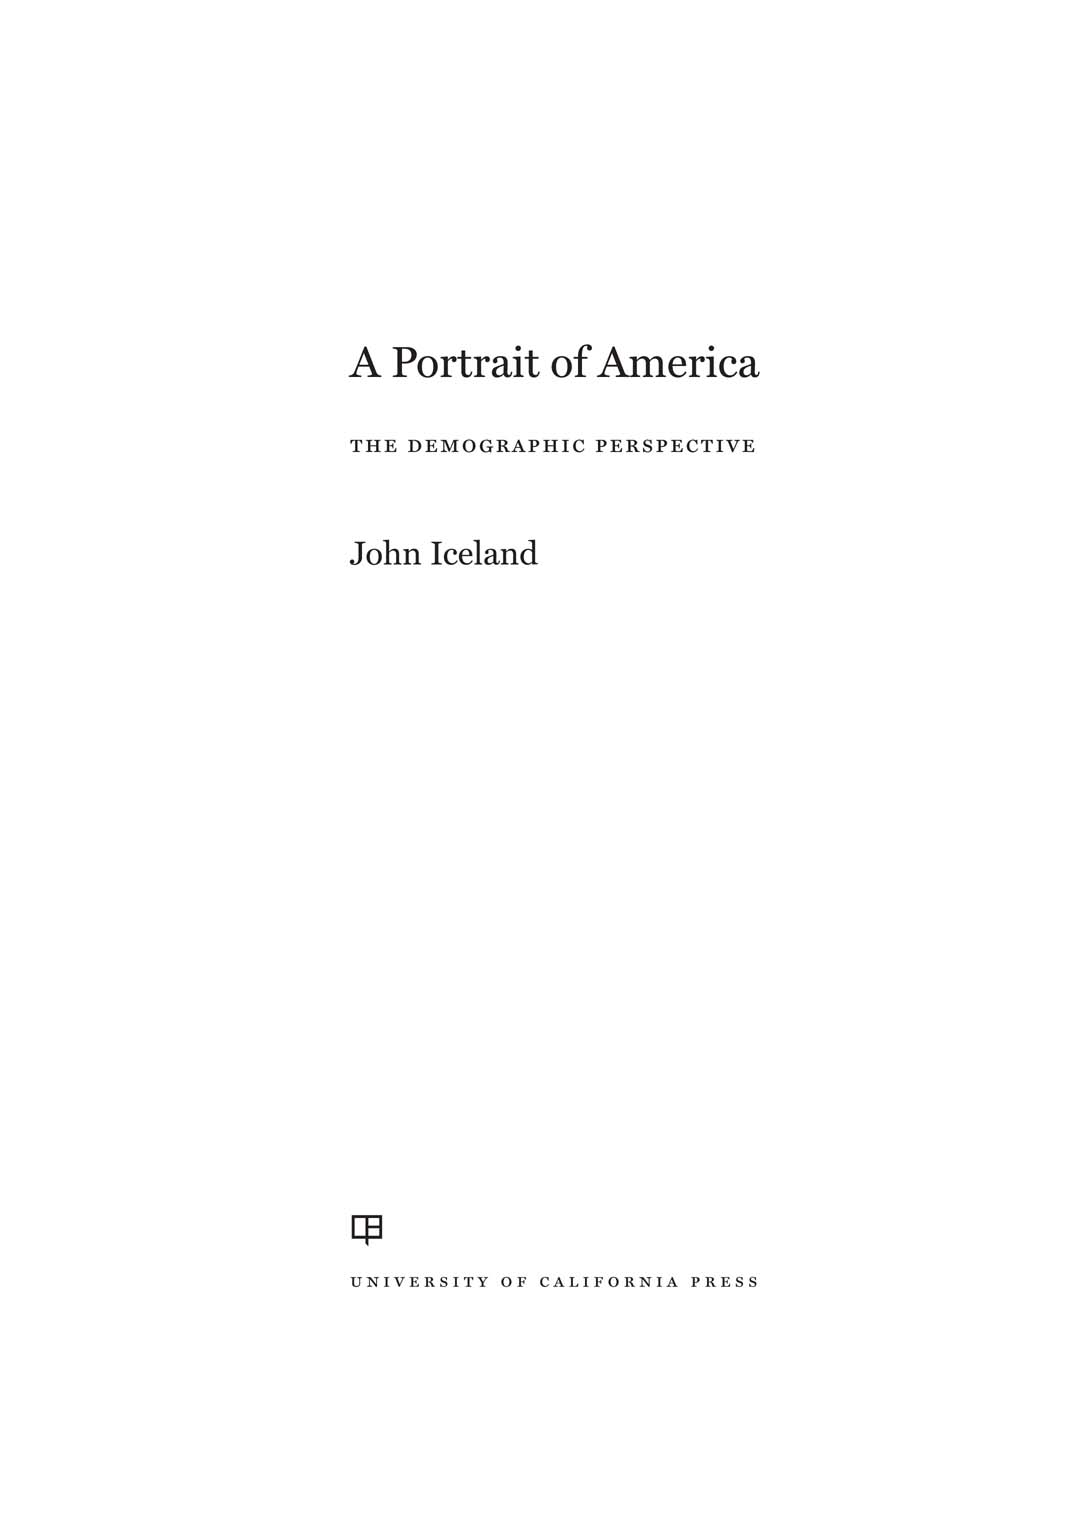 SOCIOLOGY IN THE 21ST CENTURY Edited by John Iceland Pennsylvania State - photo 1